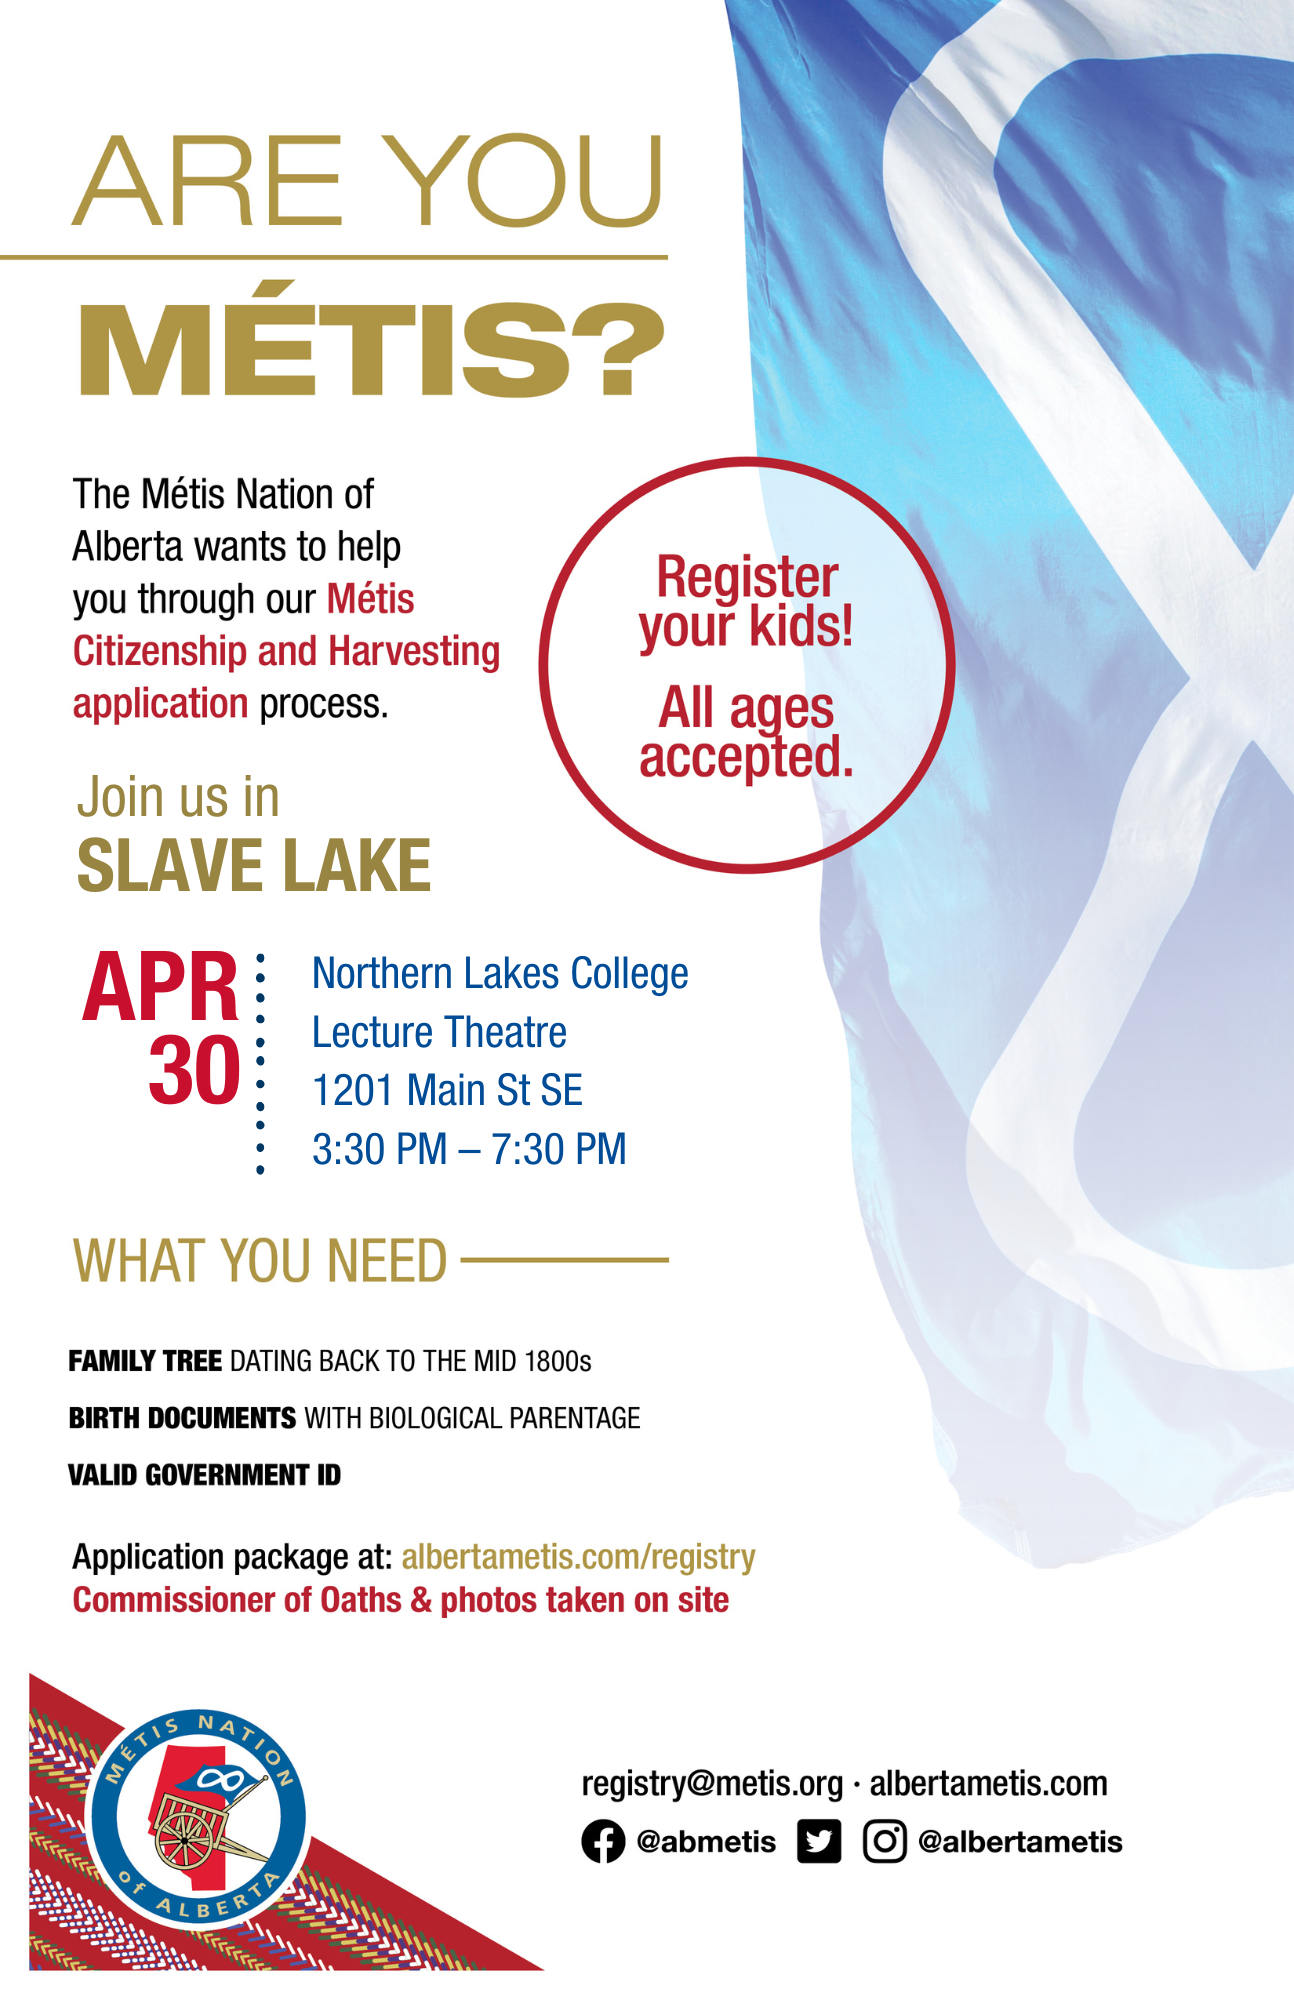 Are you Métis? The Métis Nation of Alberta wants to help you through our Métis Citizenship and Harvesting application process. Join us in Slave Lake at the Northern Lakes College, Lecture Theatre, located at 1201 Main St SE from 3:30 p.m. to 7:30 p.m. What you need: A family tree dating back to the mid 1800s, birth documents with biological parentage, valid government id. Application package at: albertametis.con/registry. Commissioner of Oaths & photos taken on site. Register your kids! All ages accepted.